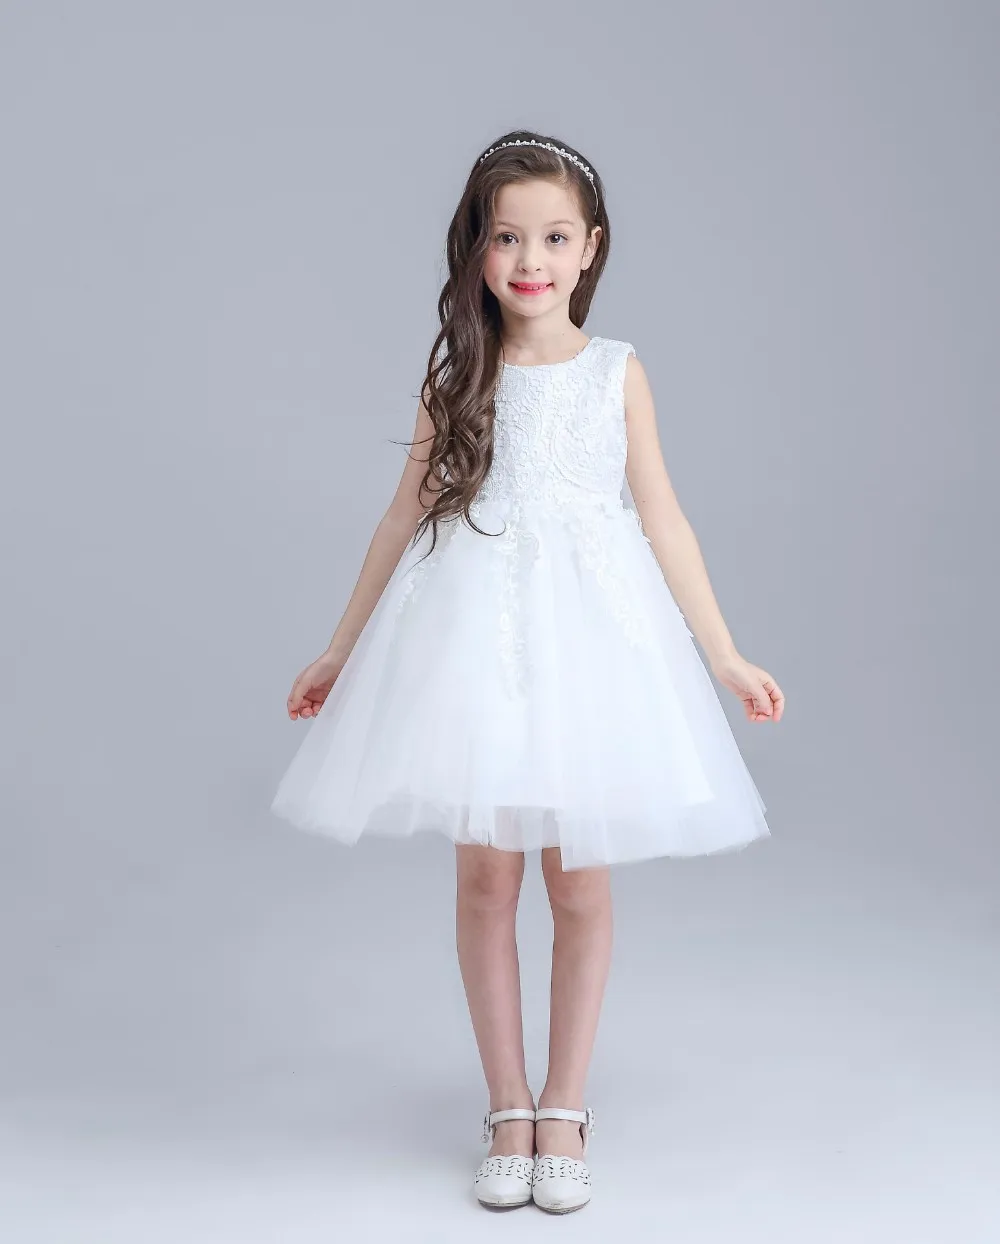 2017 Hot White First Communion Dresses For Girl Tulle Lace Infant Toddler Pageant Flower Girl Dress for Wedding and Birthday